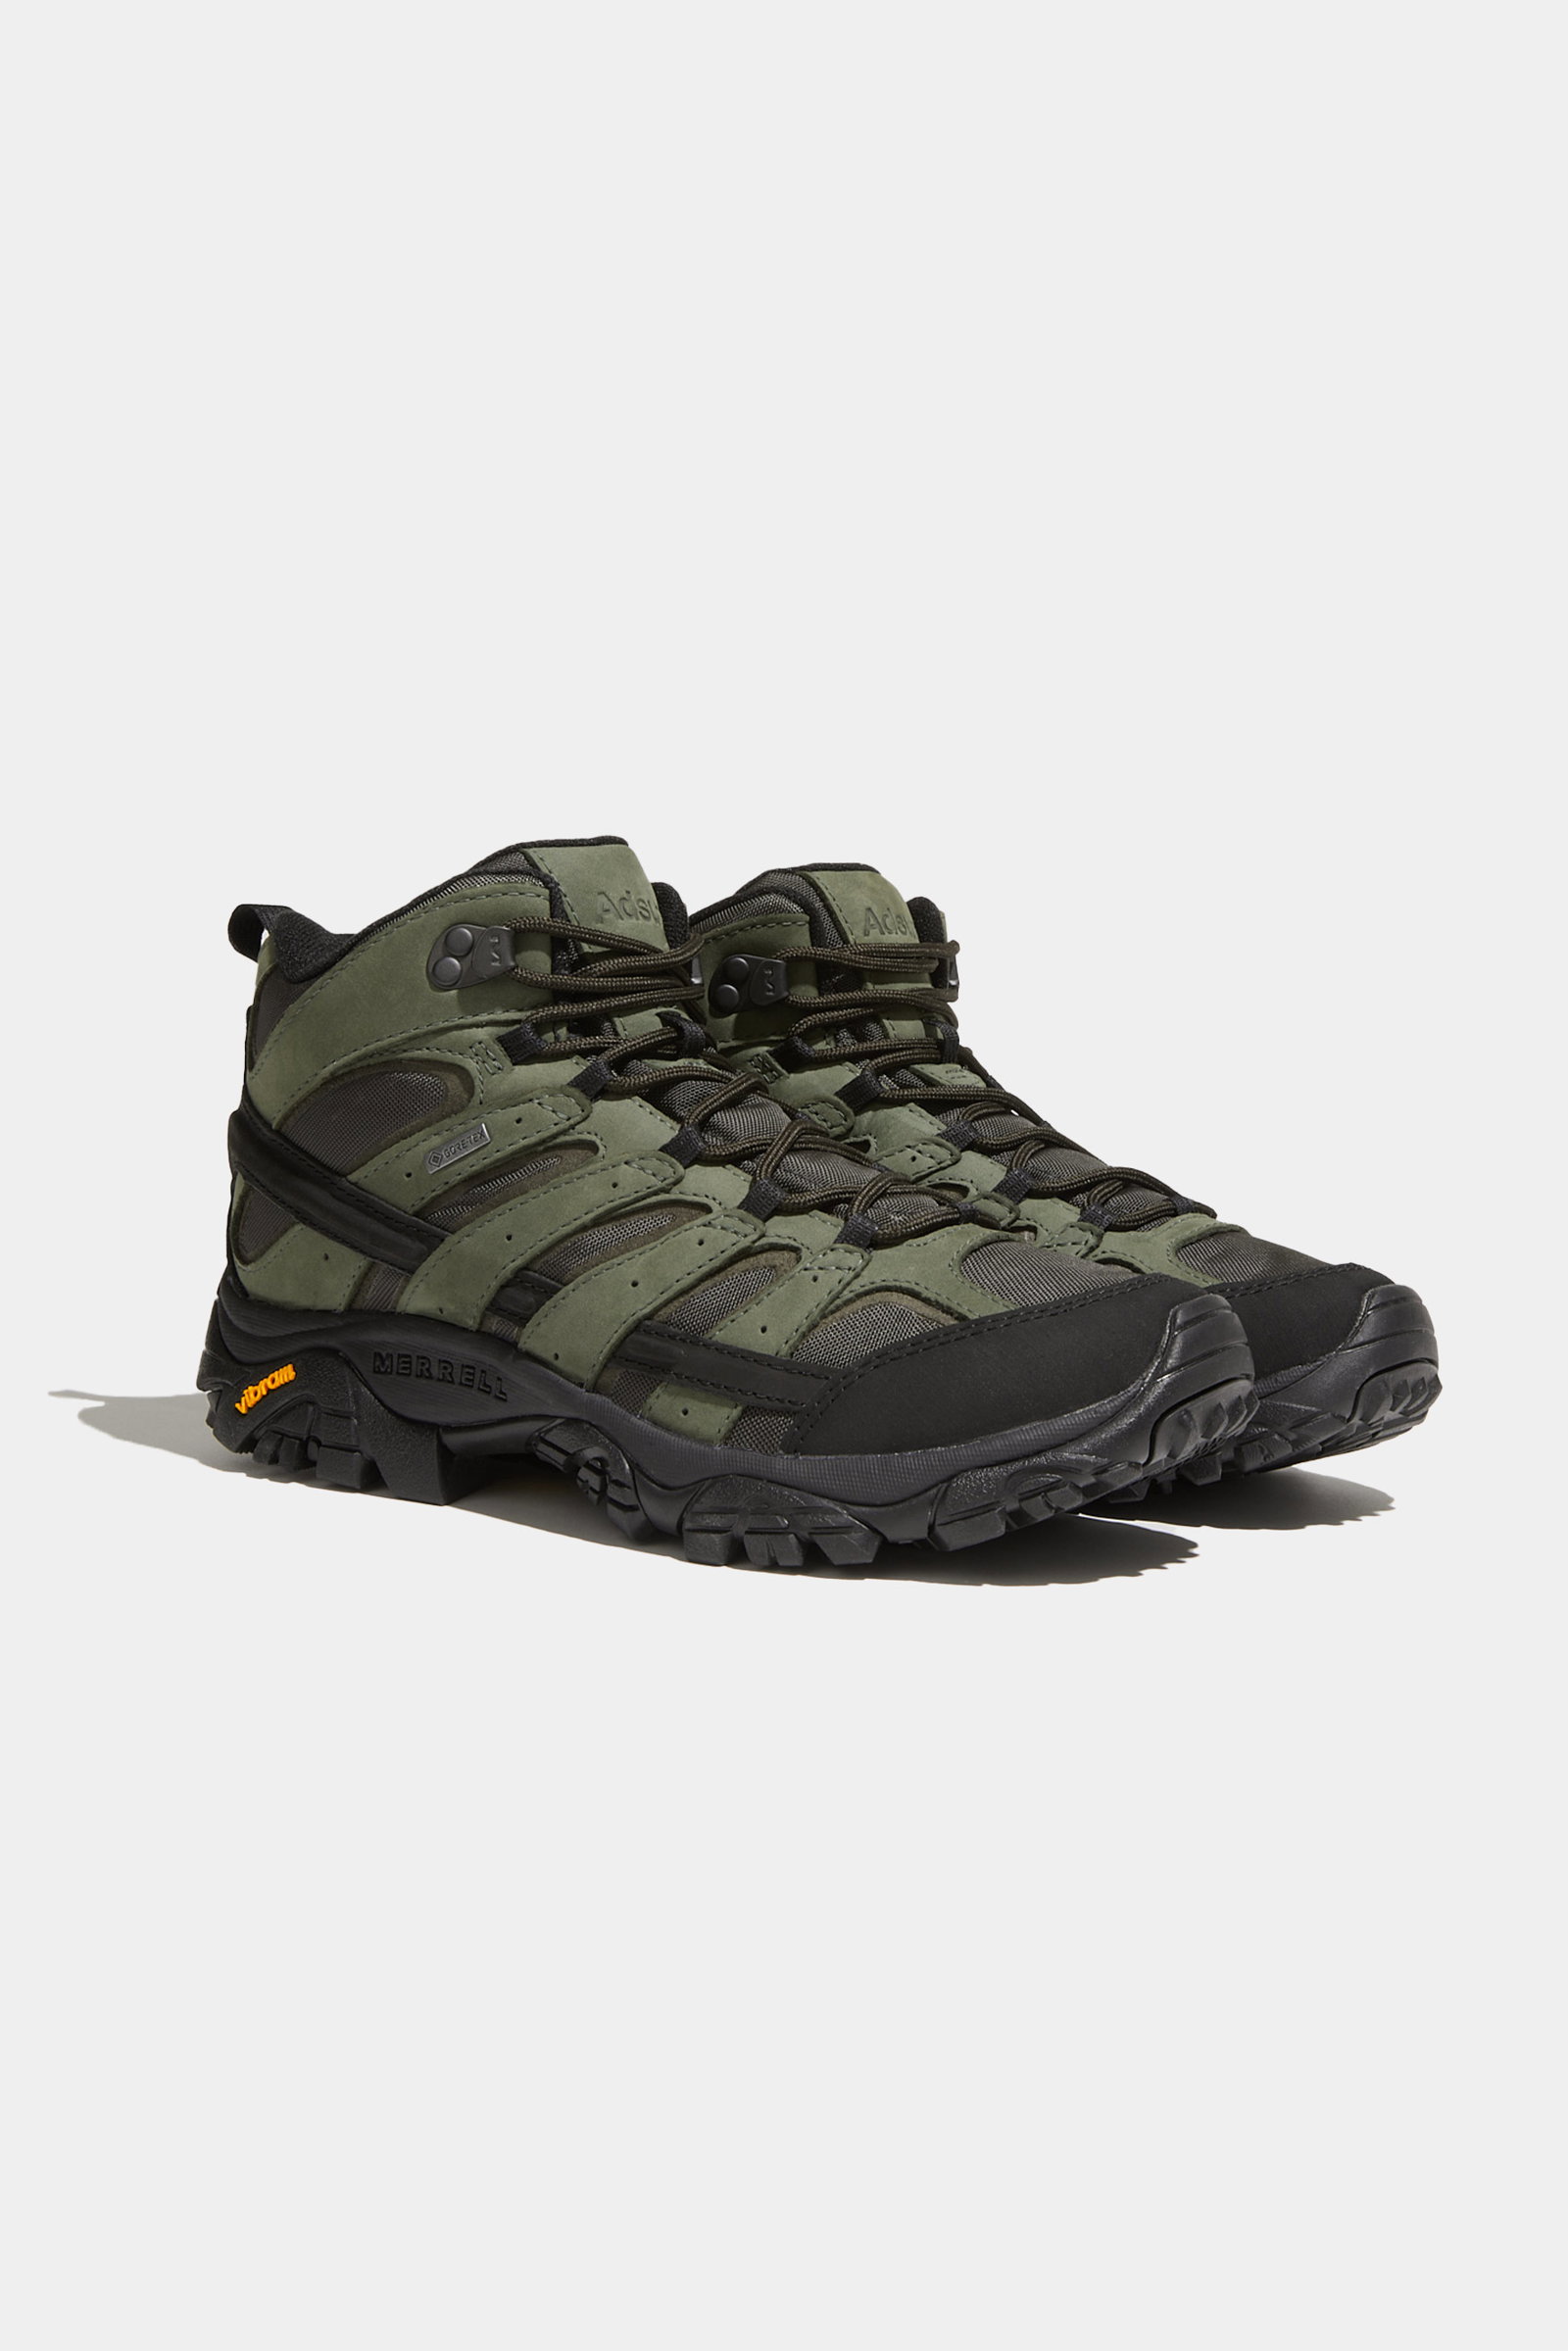 Now Available: Merrell 1TRL Moab | Milled